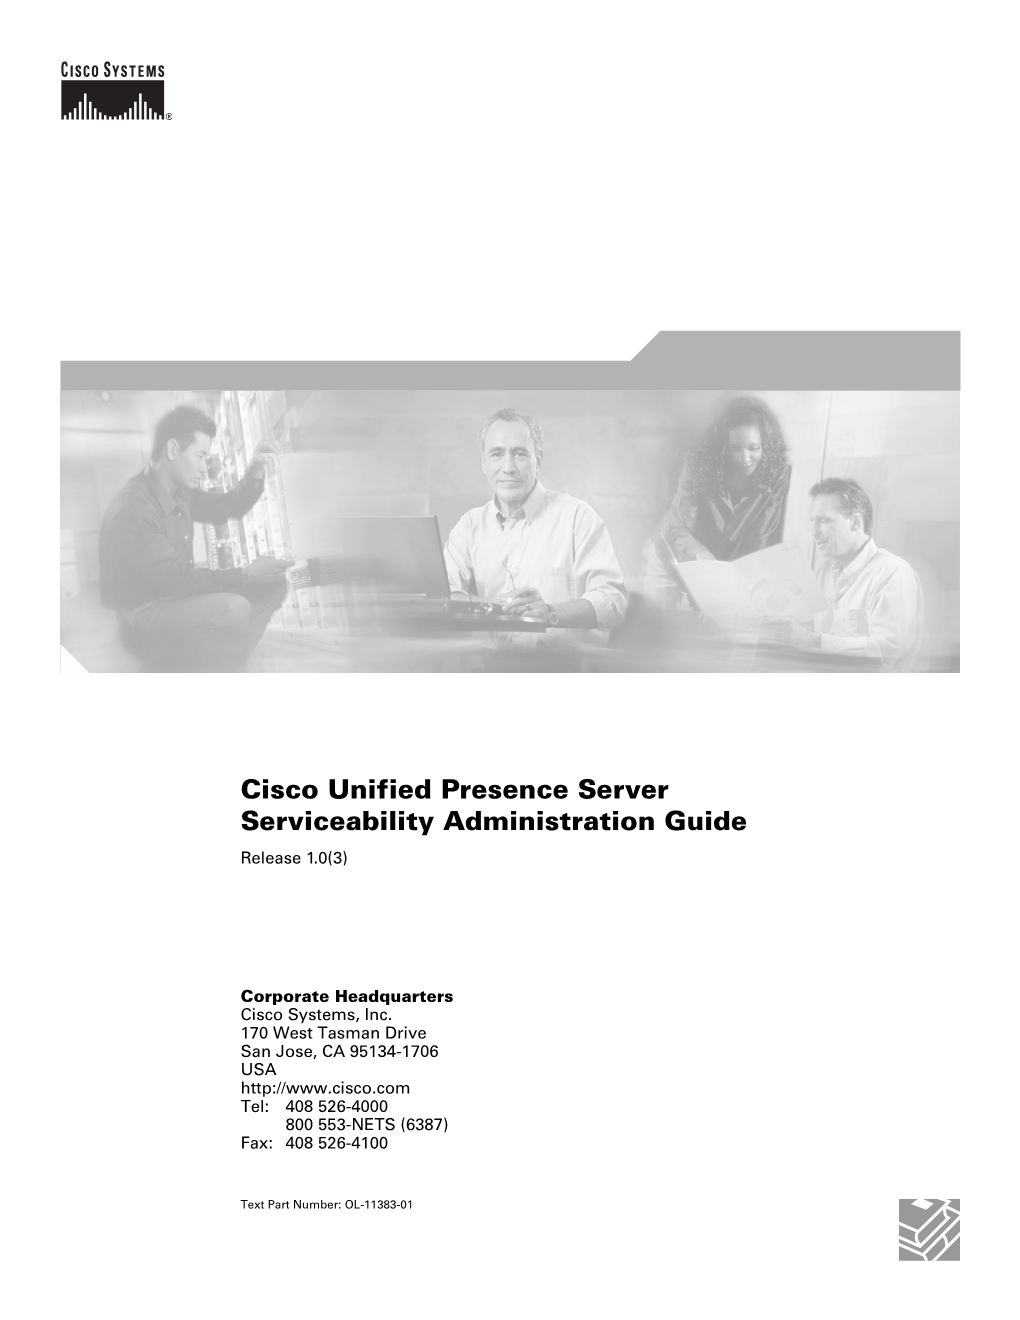 Cisco Unified Presence Server Serviceability Administration Guide Release 1.0(3)